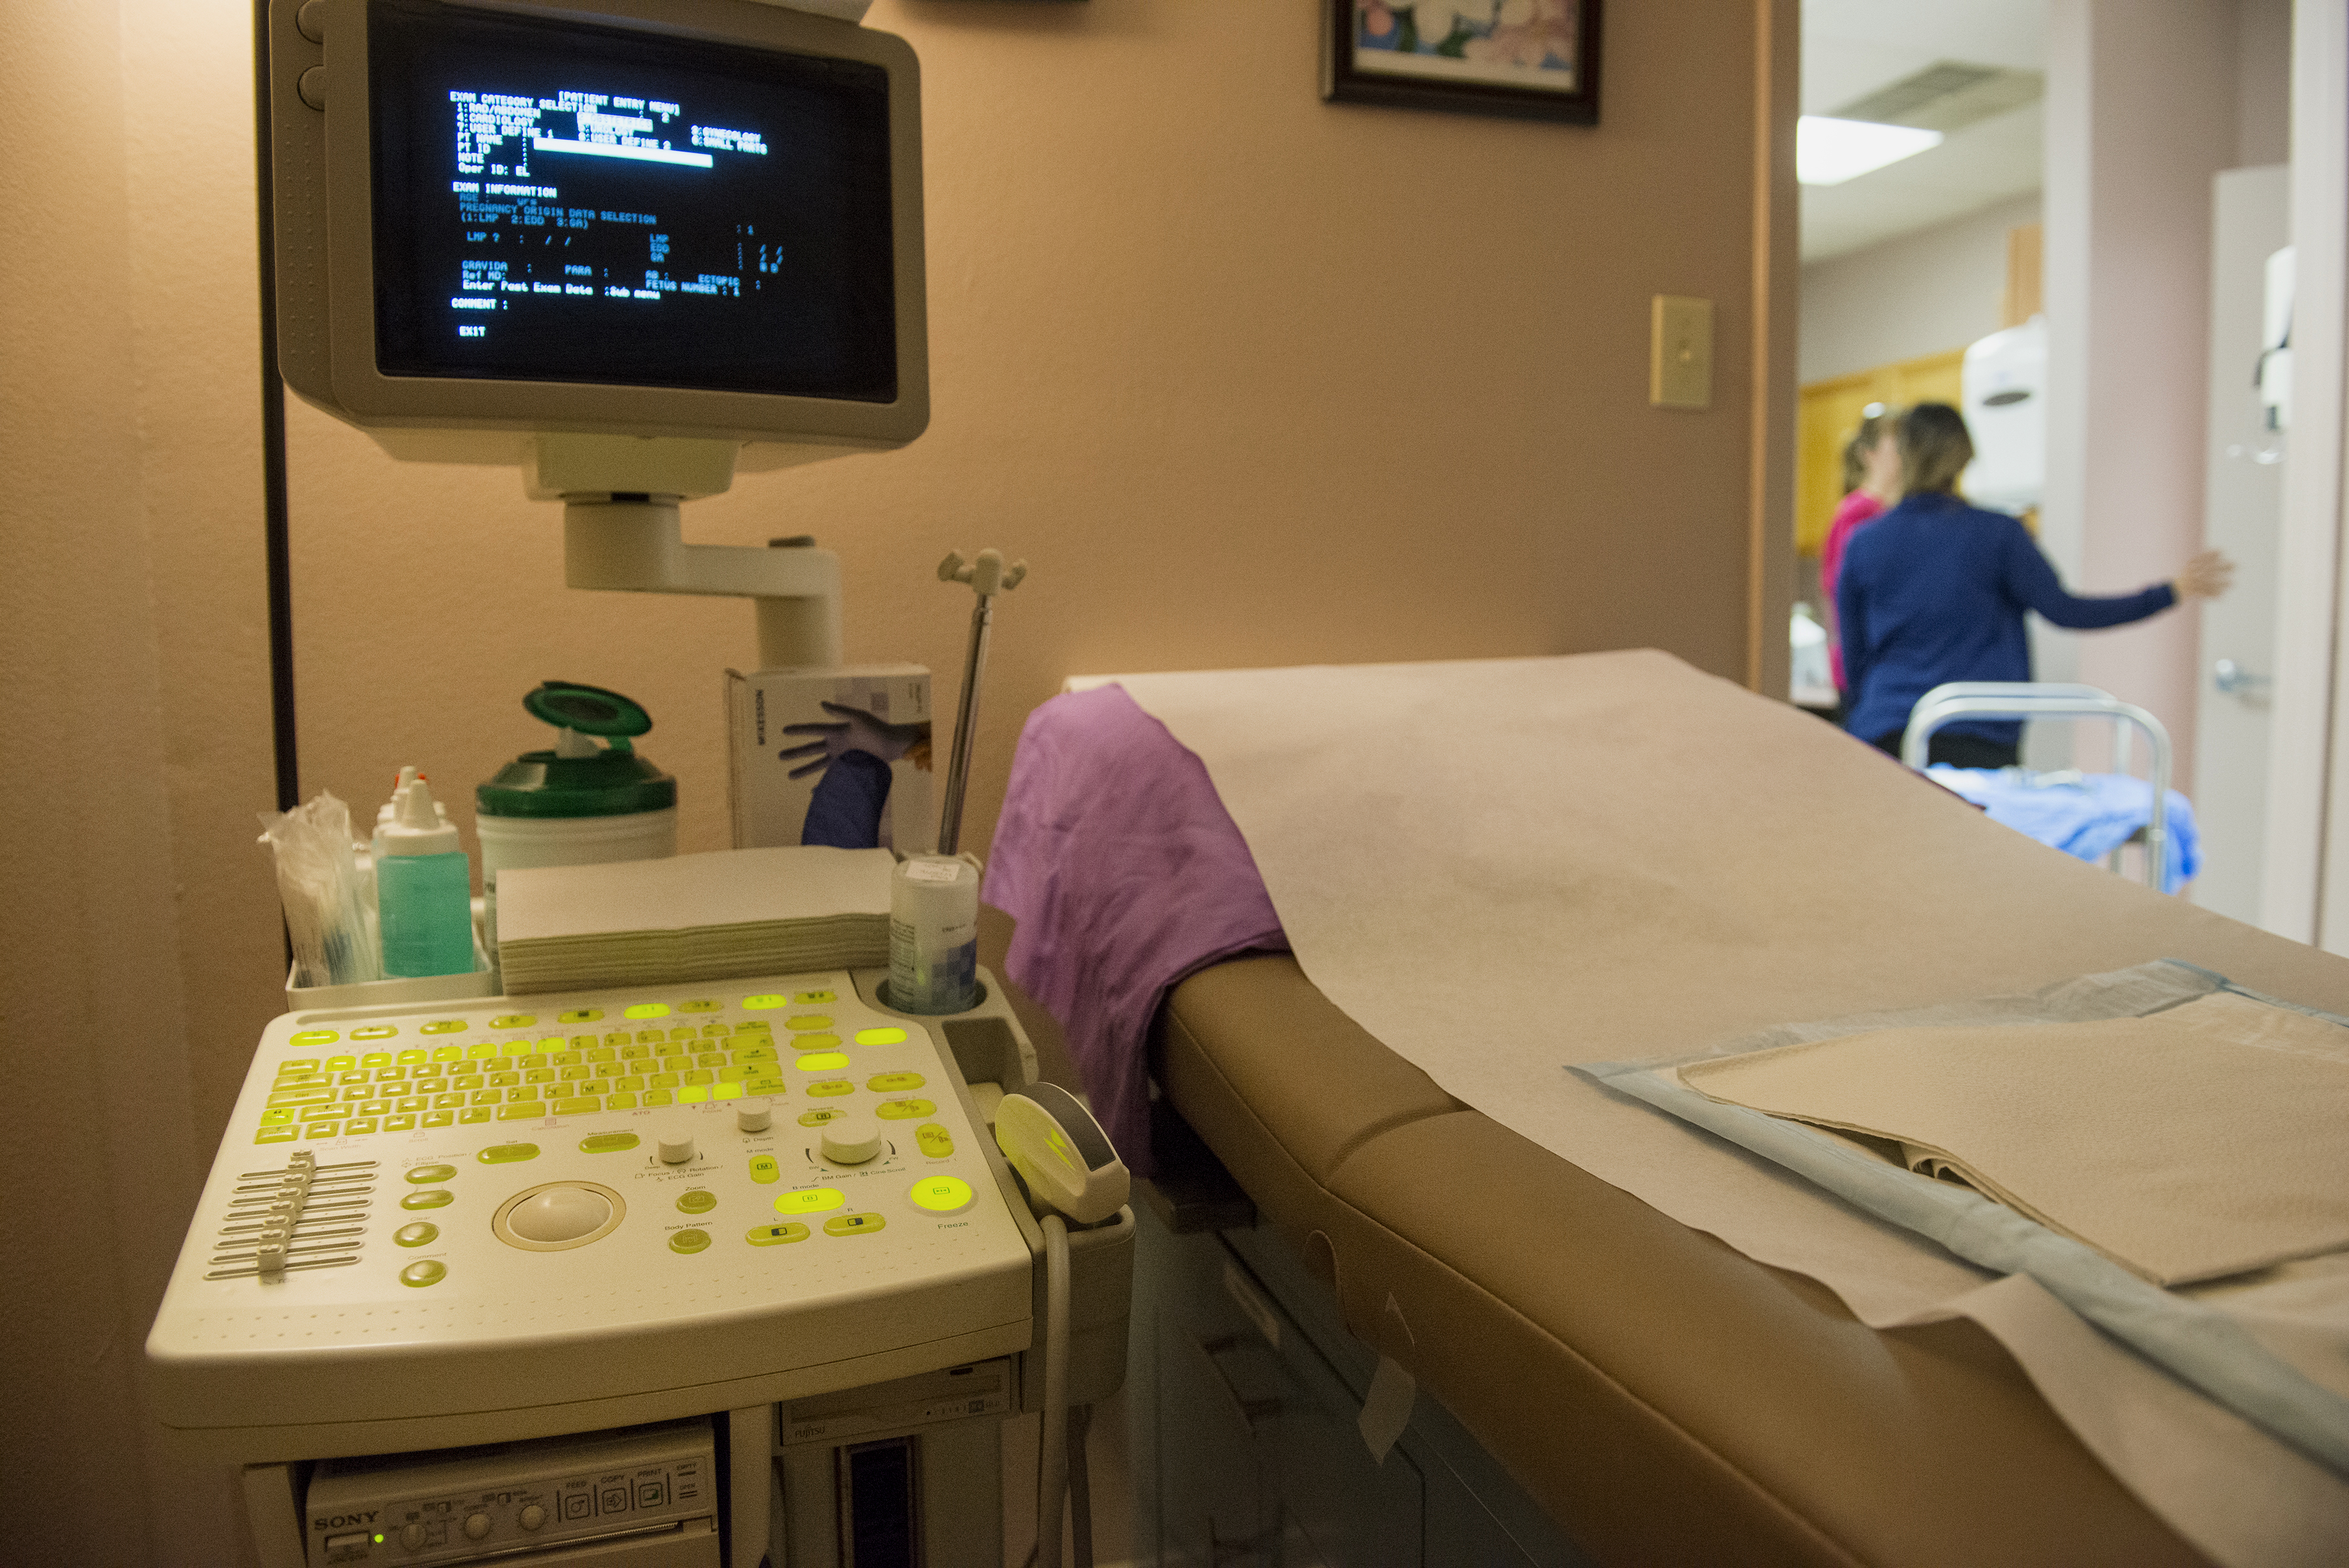 A procedure room at the Whole Woman's Health abortion clinic in San Antonio, Texas. (Bloomberg&mdash;Bloomberg via Getty Images)